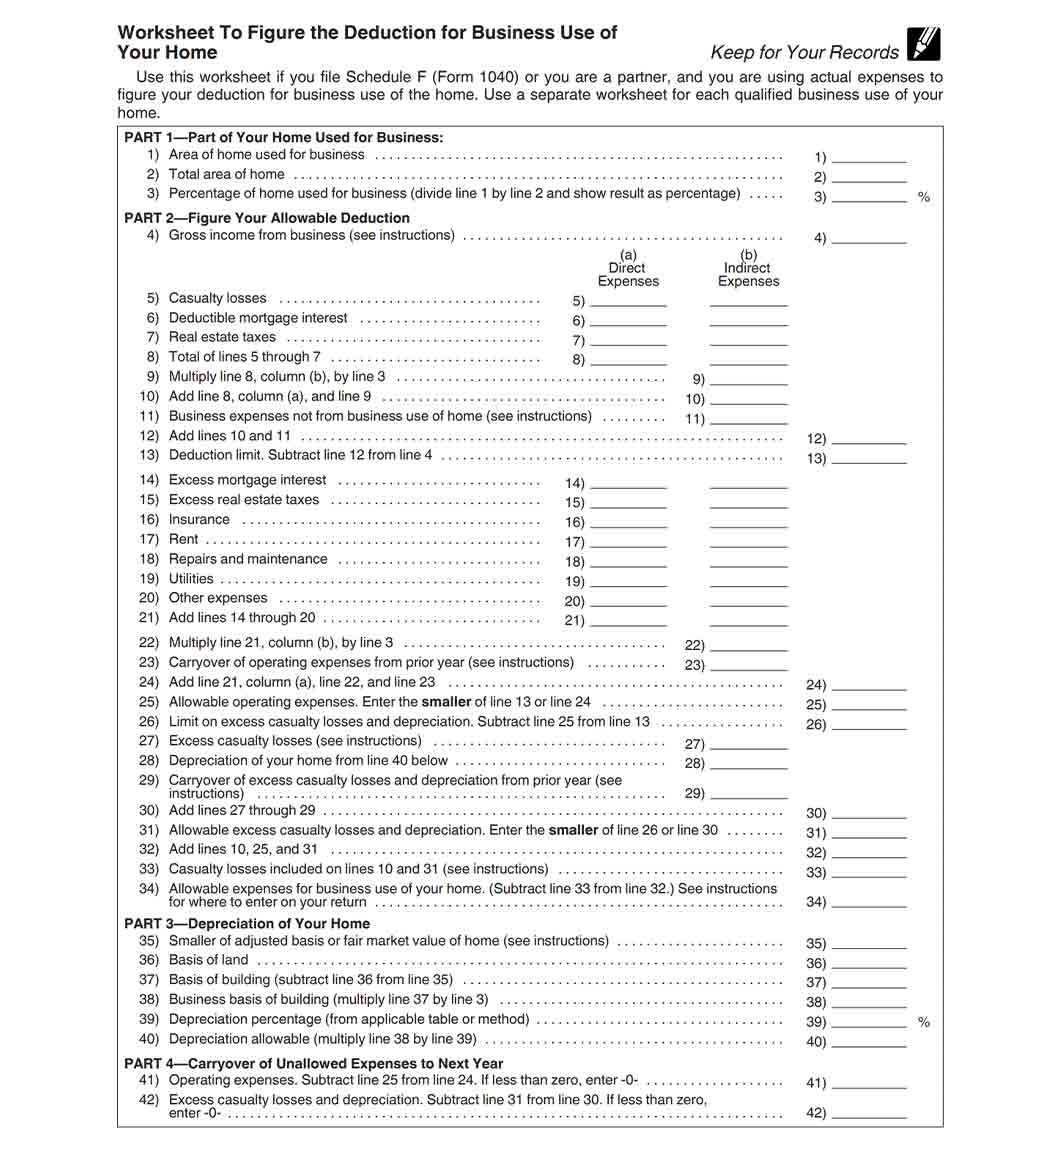 IRS worksheet to figured the deduction for business use of a home